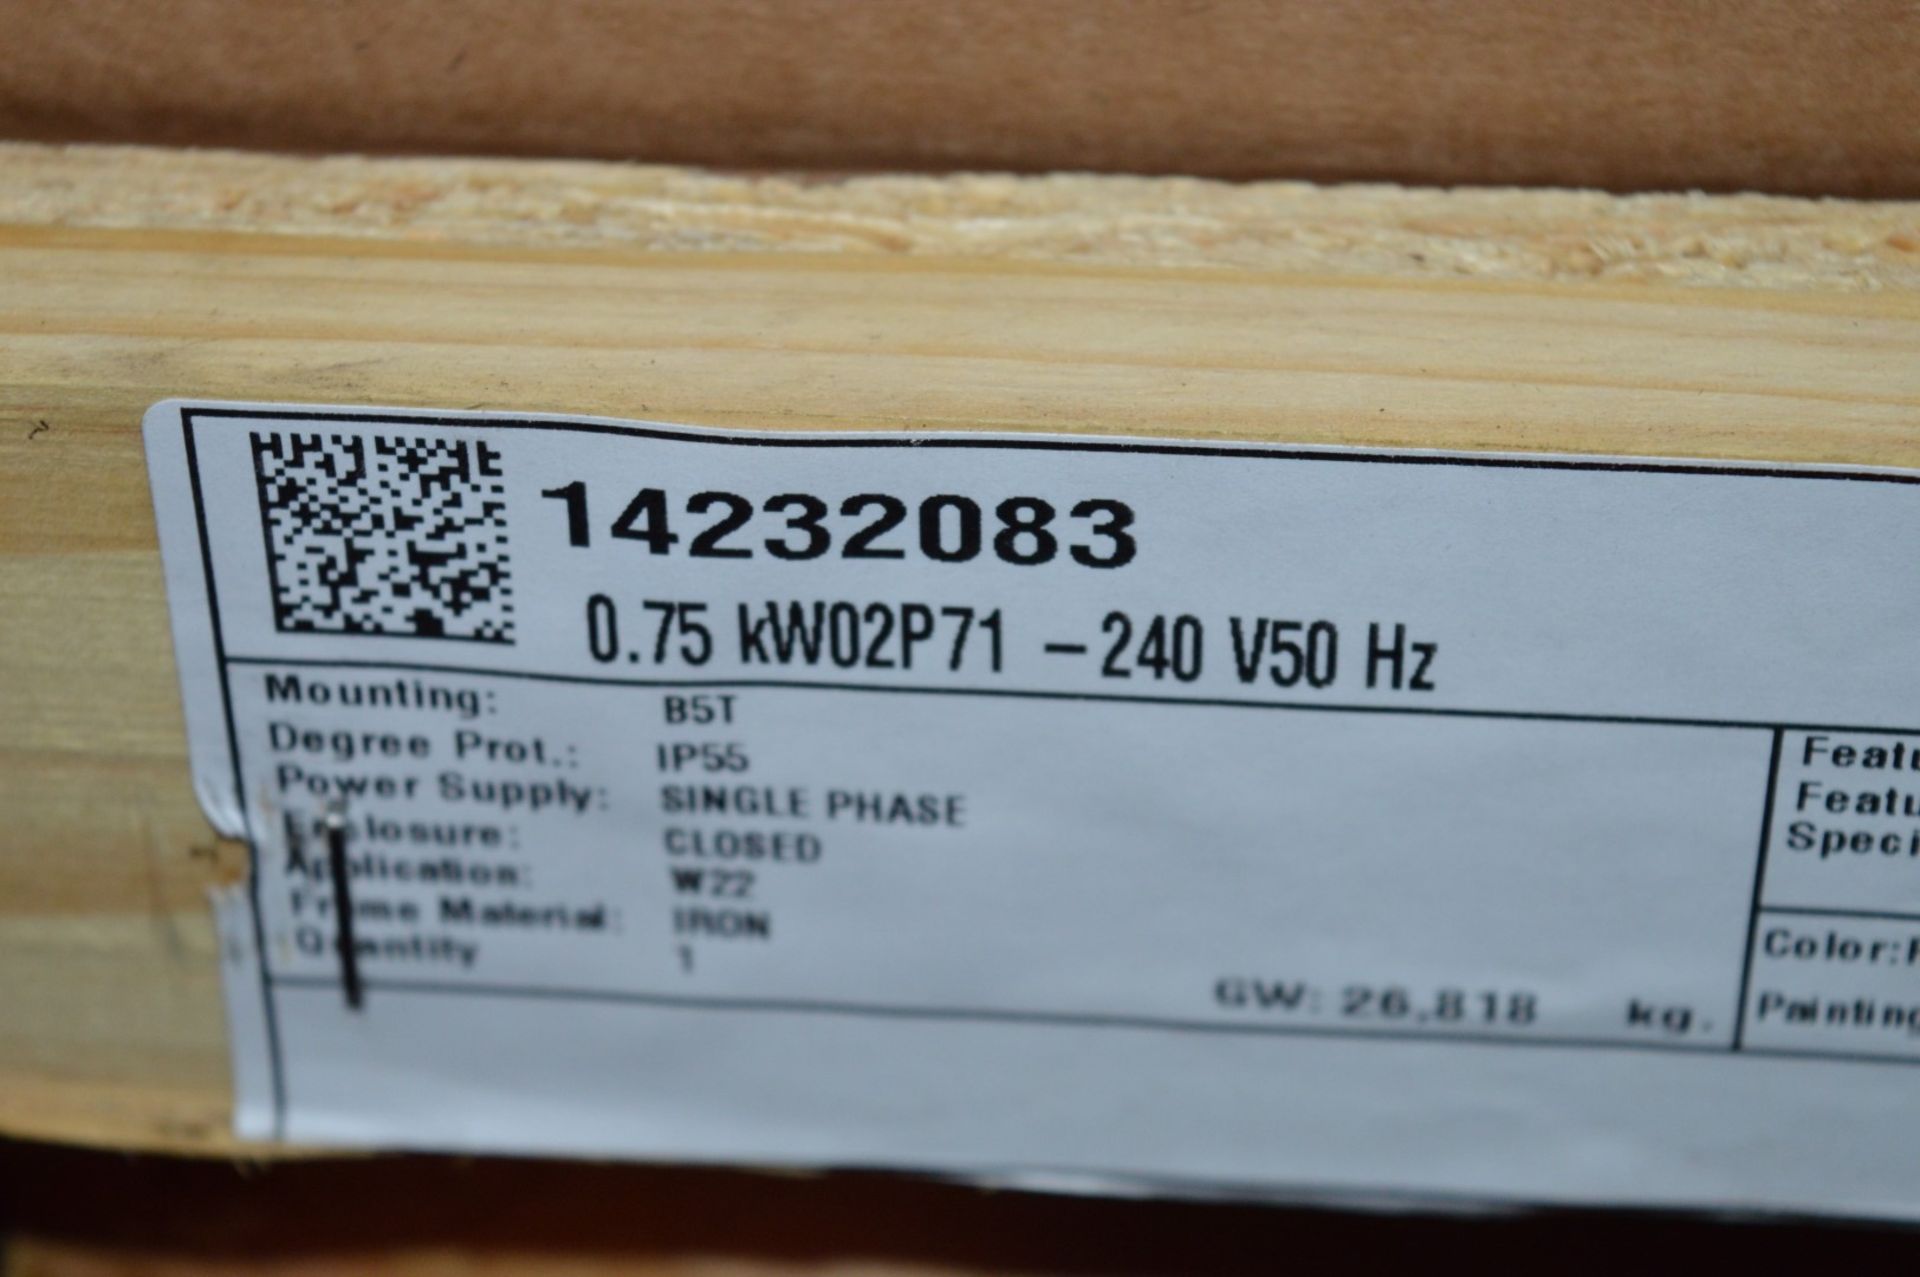 1 x Weg W22 240v IP55 Single Phase Electric Motor - New and Boxed - CL295 - Location: Altrincham - Image 8 of 8